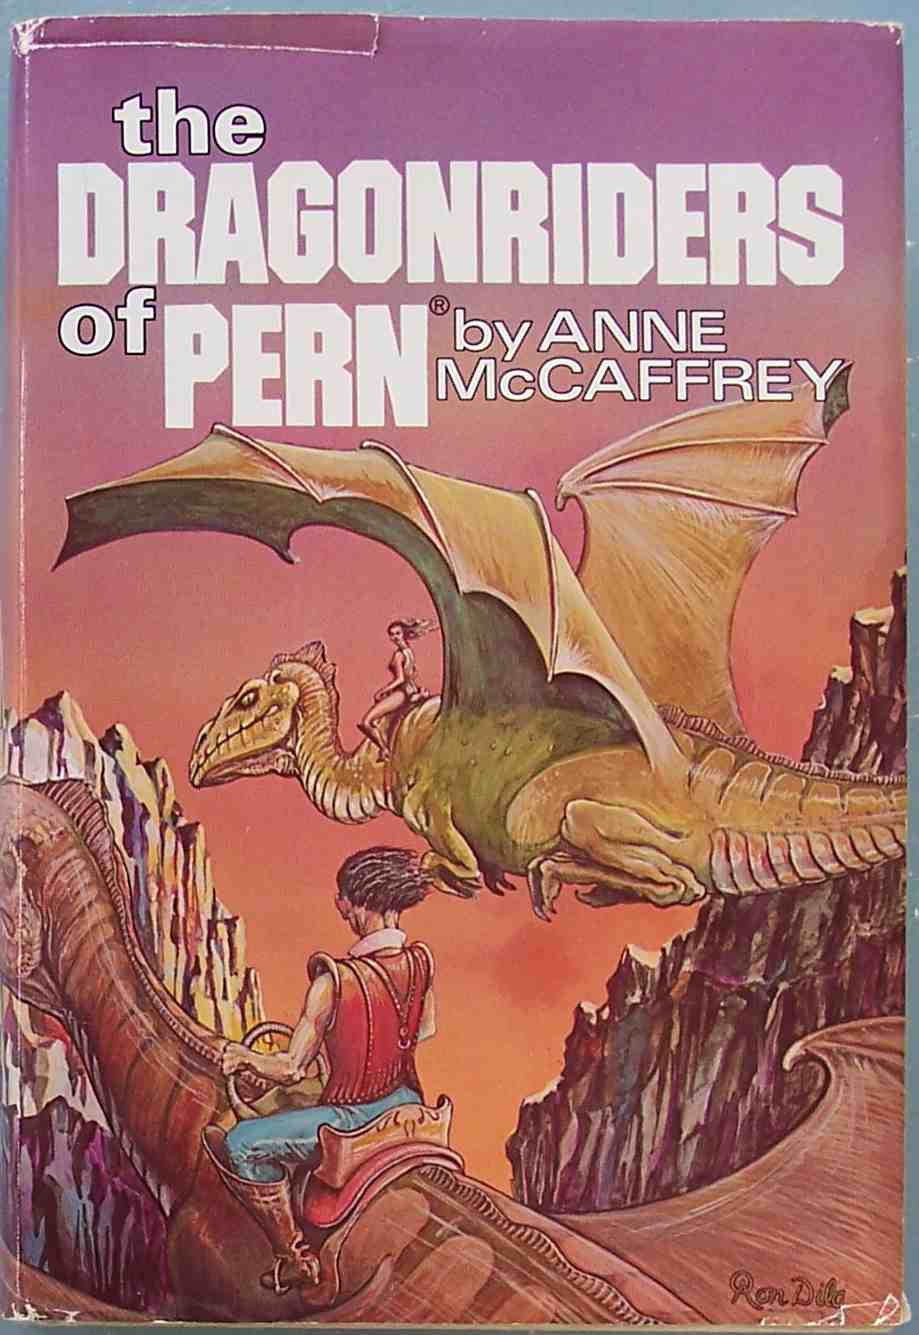 a paperback book cover for the dragon riders of pern